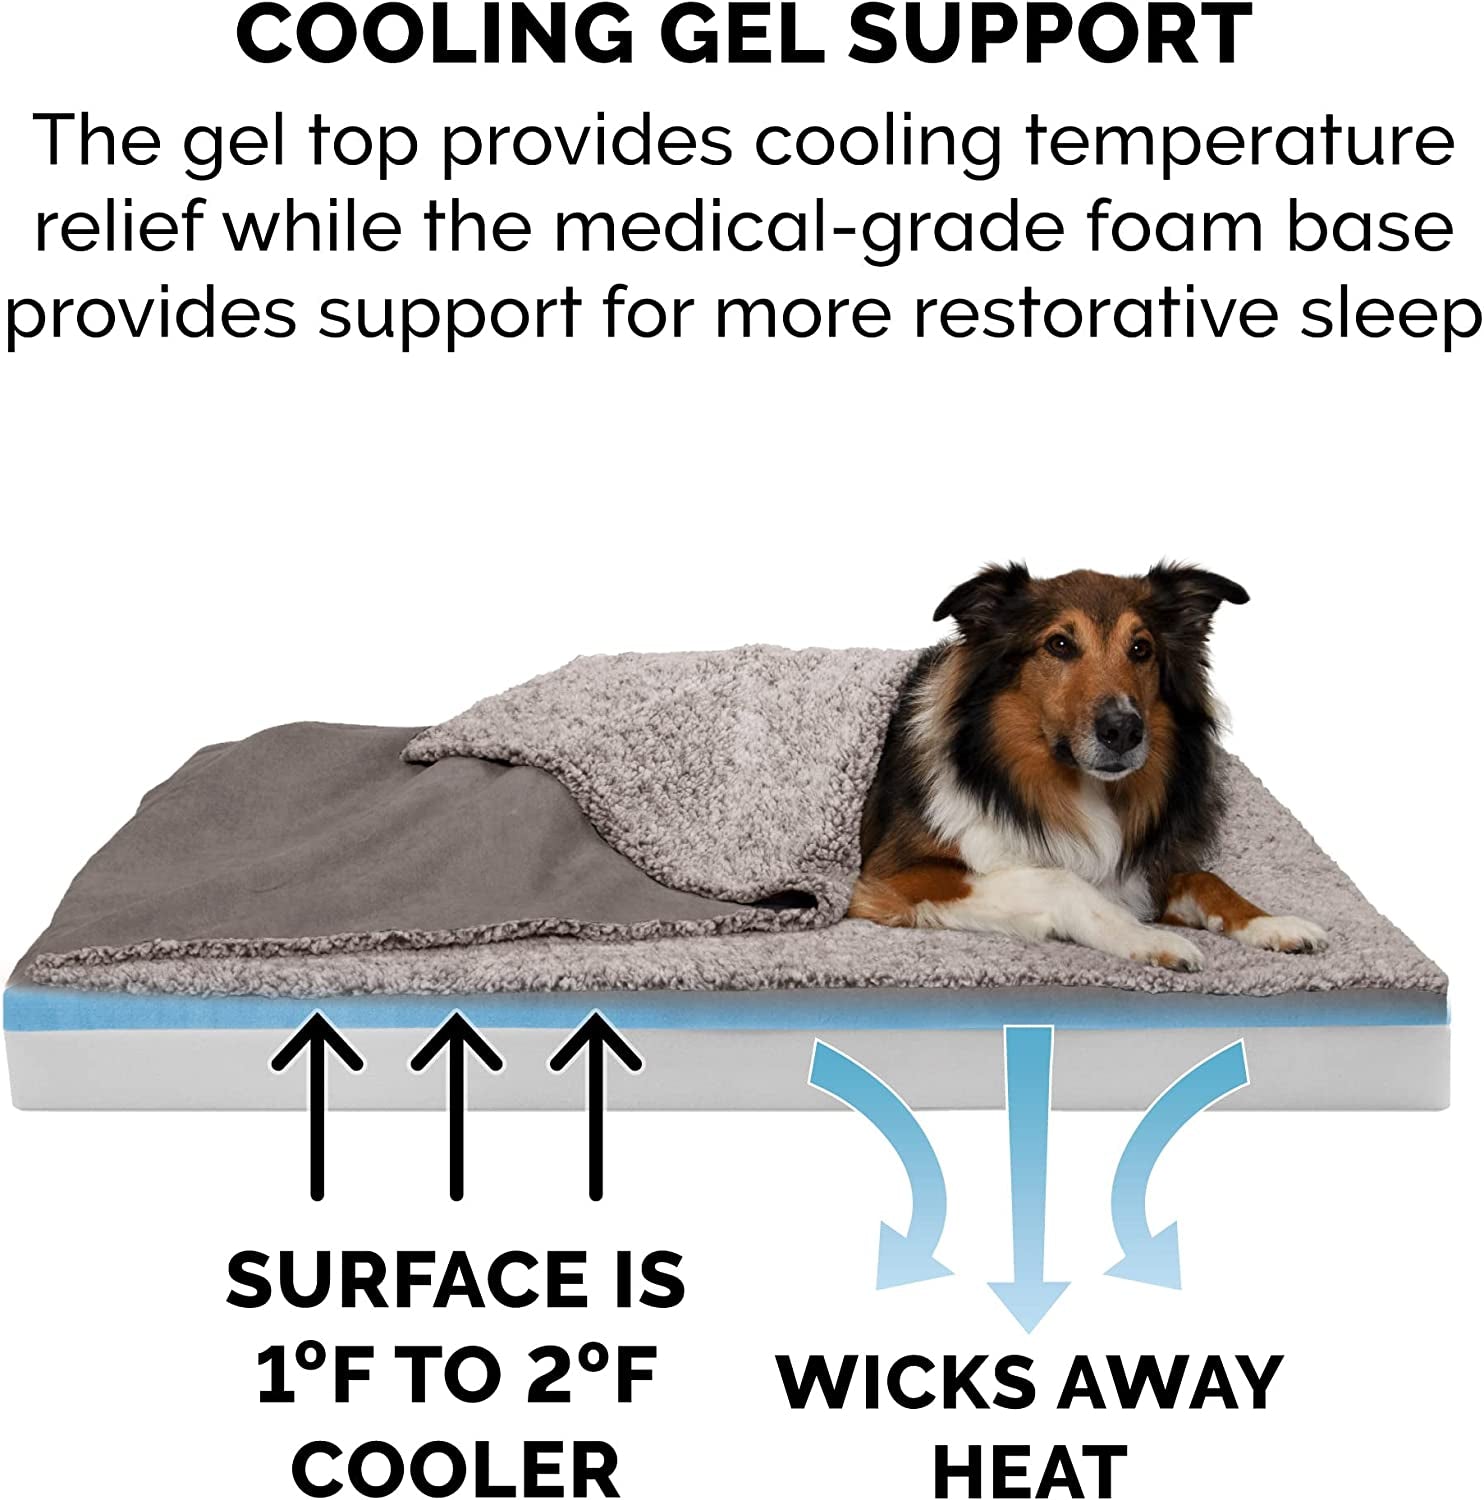 Orthopedic, Cooling Gel, and Memory Foam Pet Beds for Small, Medium, and Large Dogs and Cats - Luxe Perfect Comfort Sofa Dog Bed, Performance Linen Sofa Dog Bed, and More